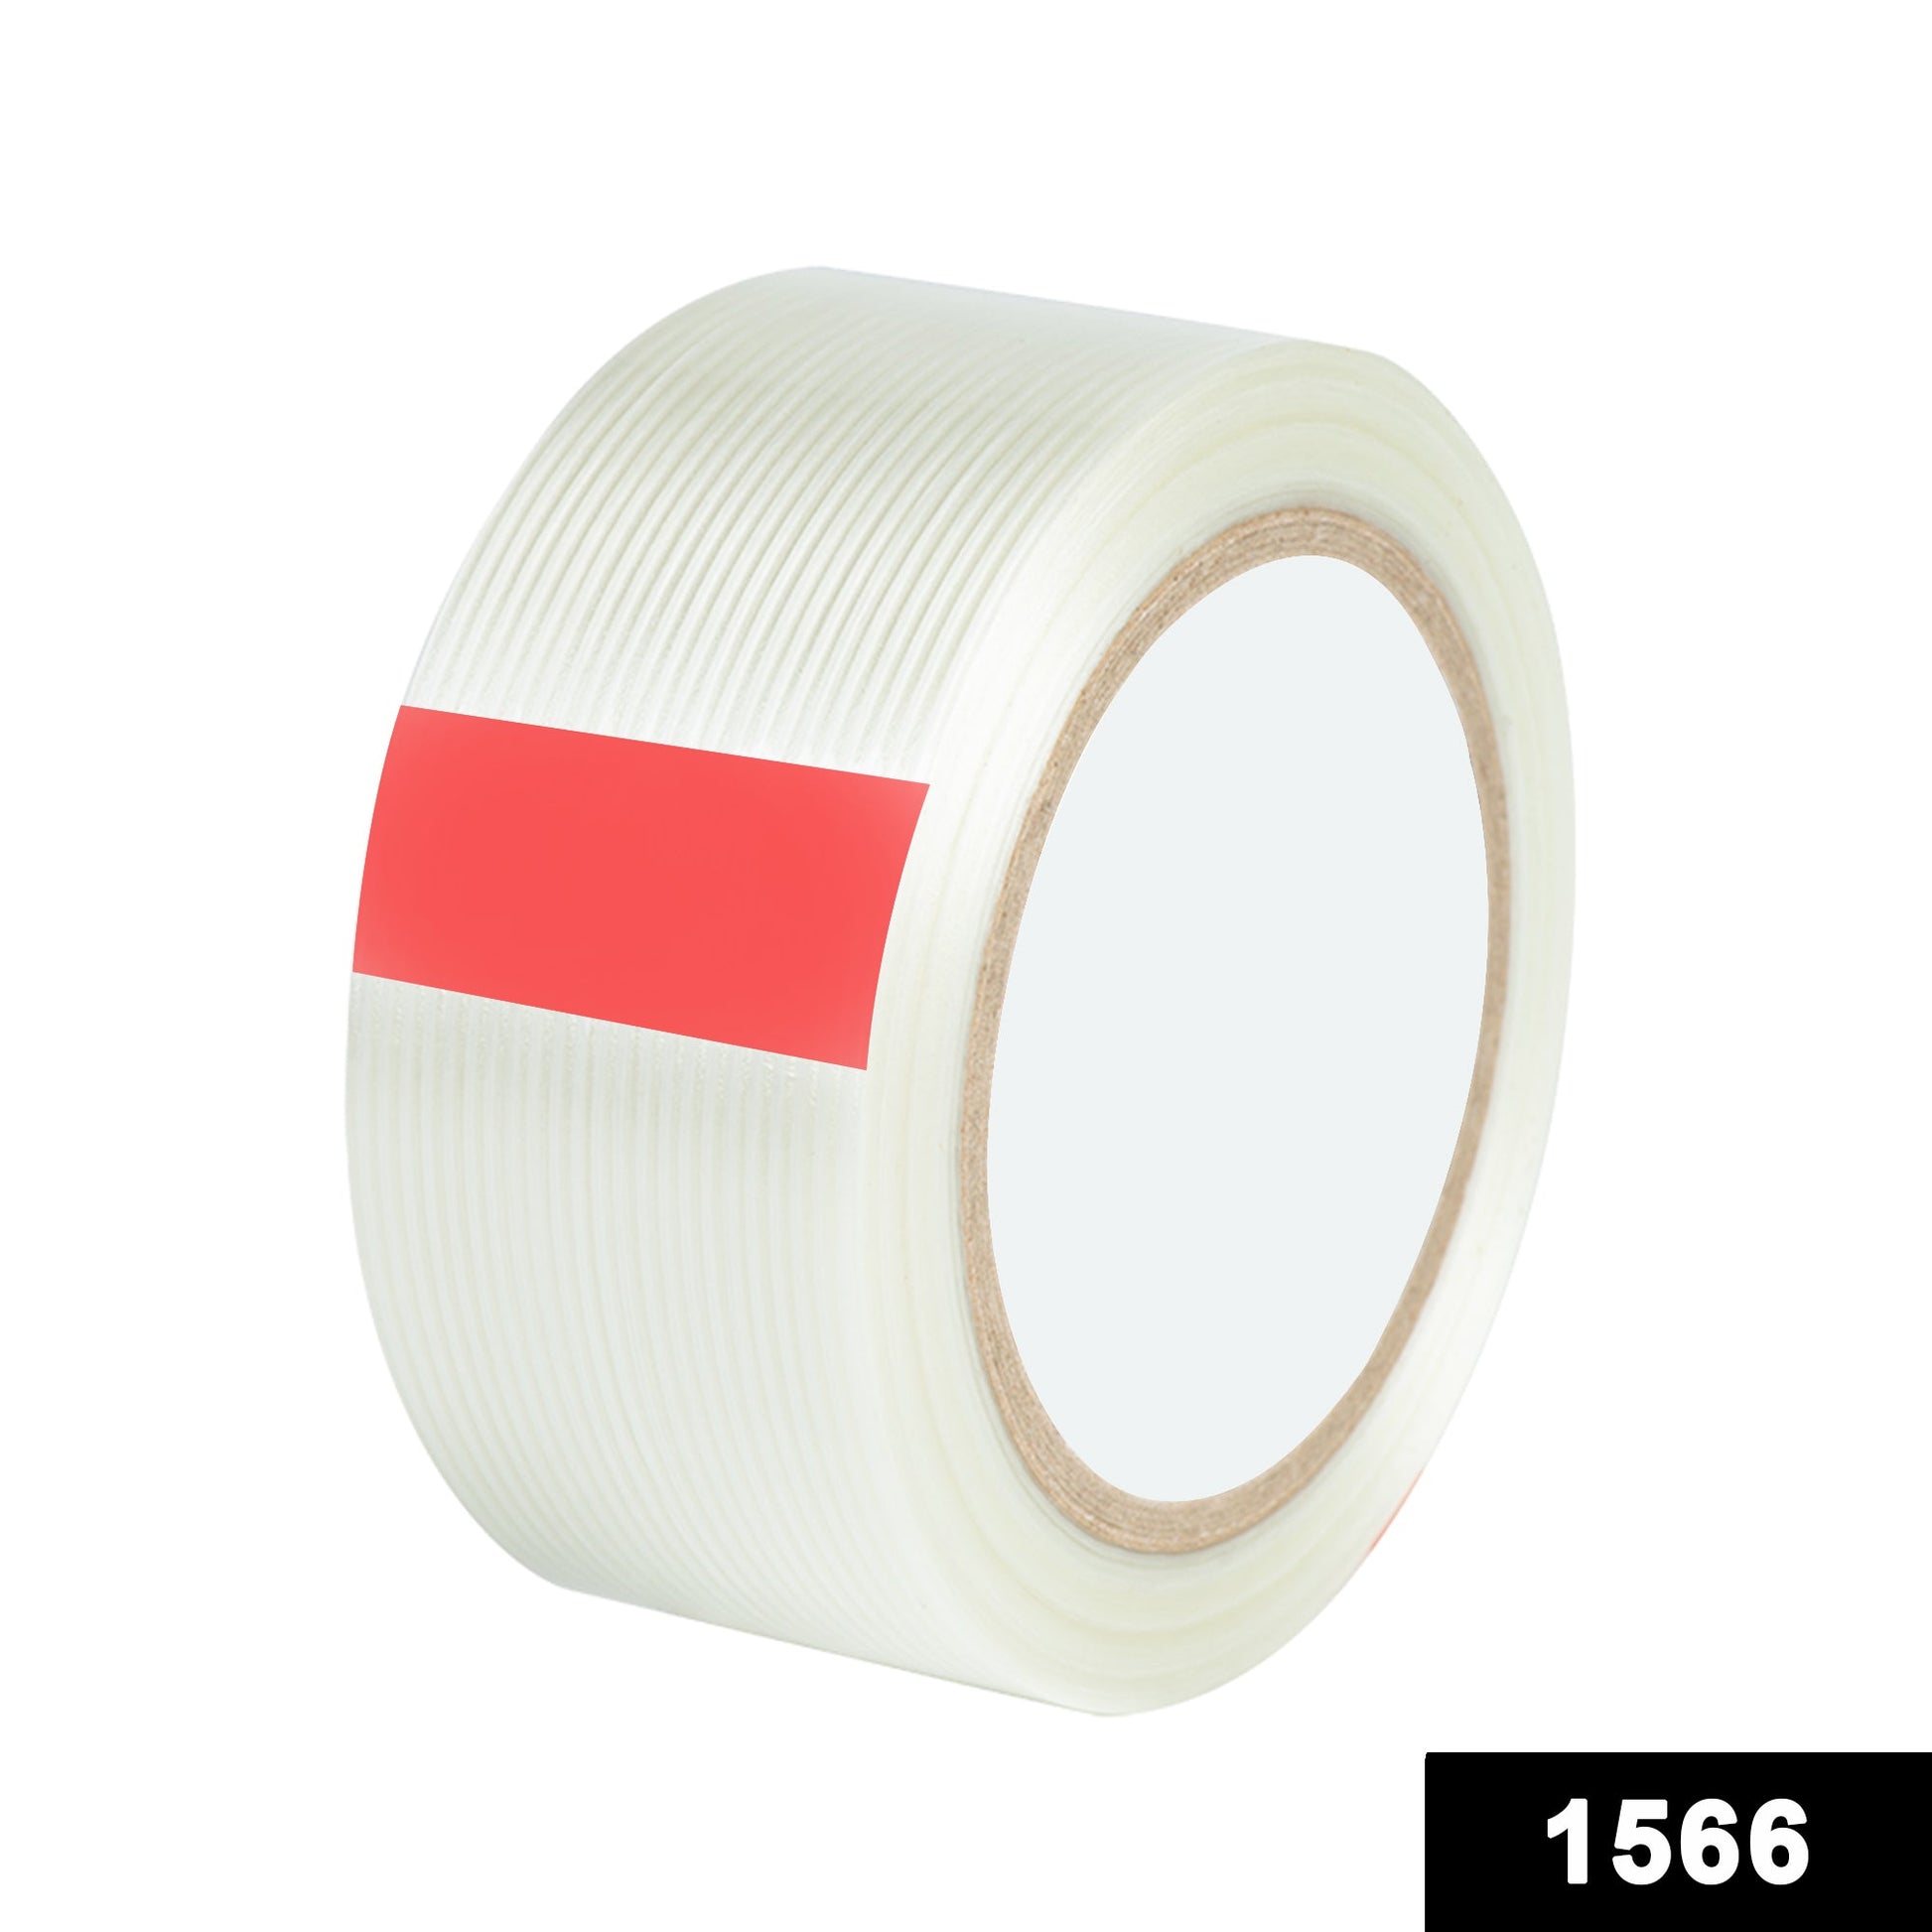 Transparent Strong Tape Rolls for Multipurpose Packing Use